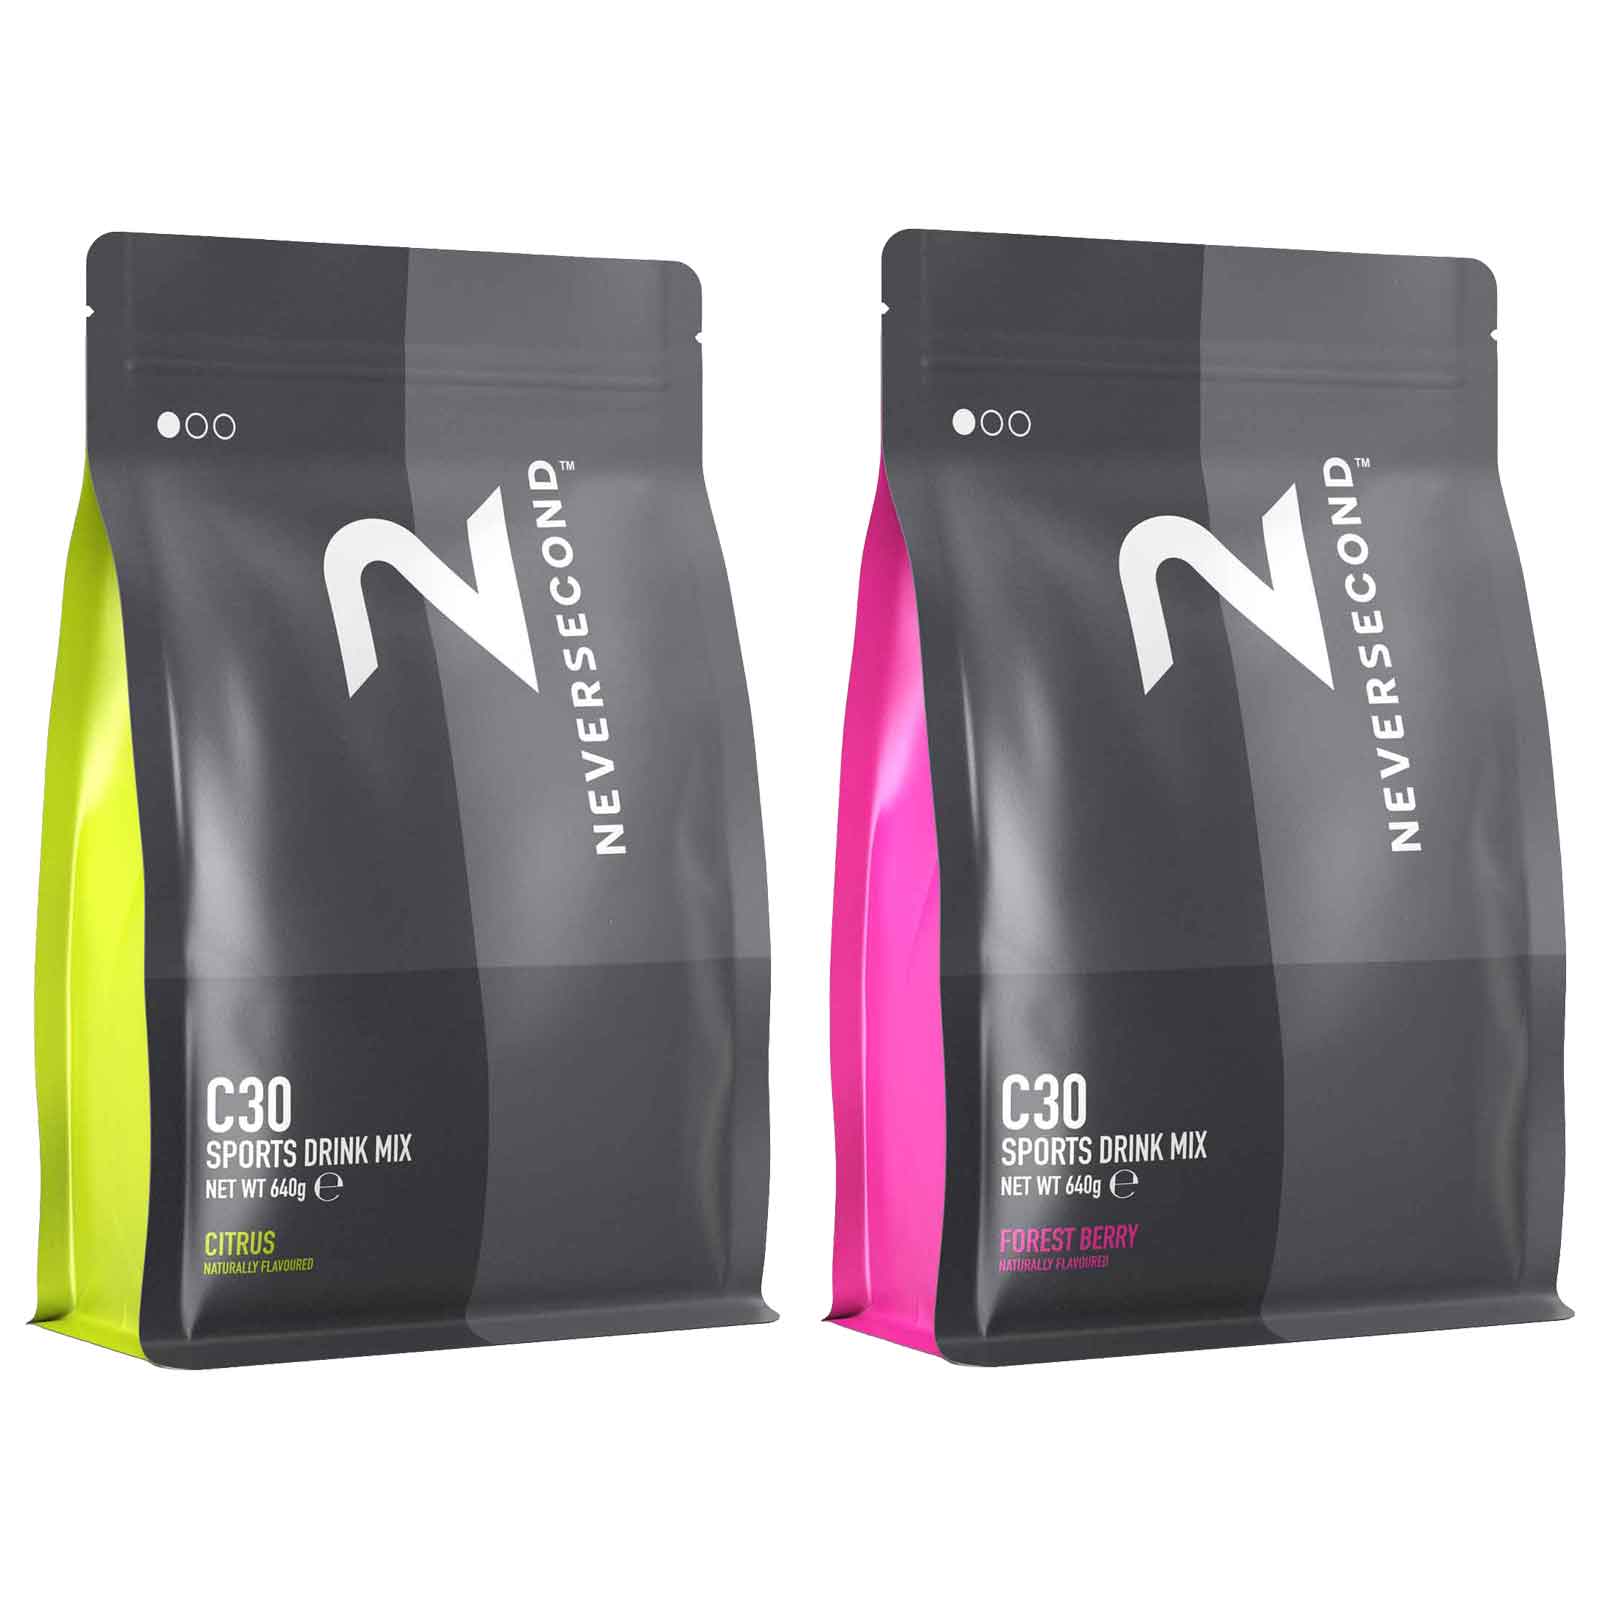 Image of Neversecond C30 Sports Drink Mix - Carbohydrate Beverage Powder - 640g